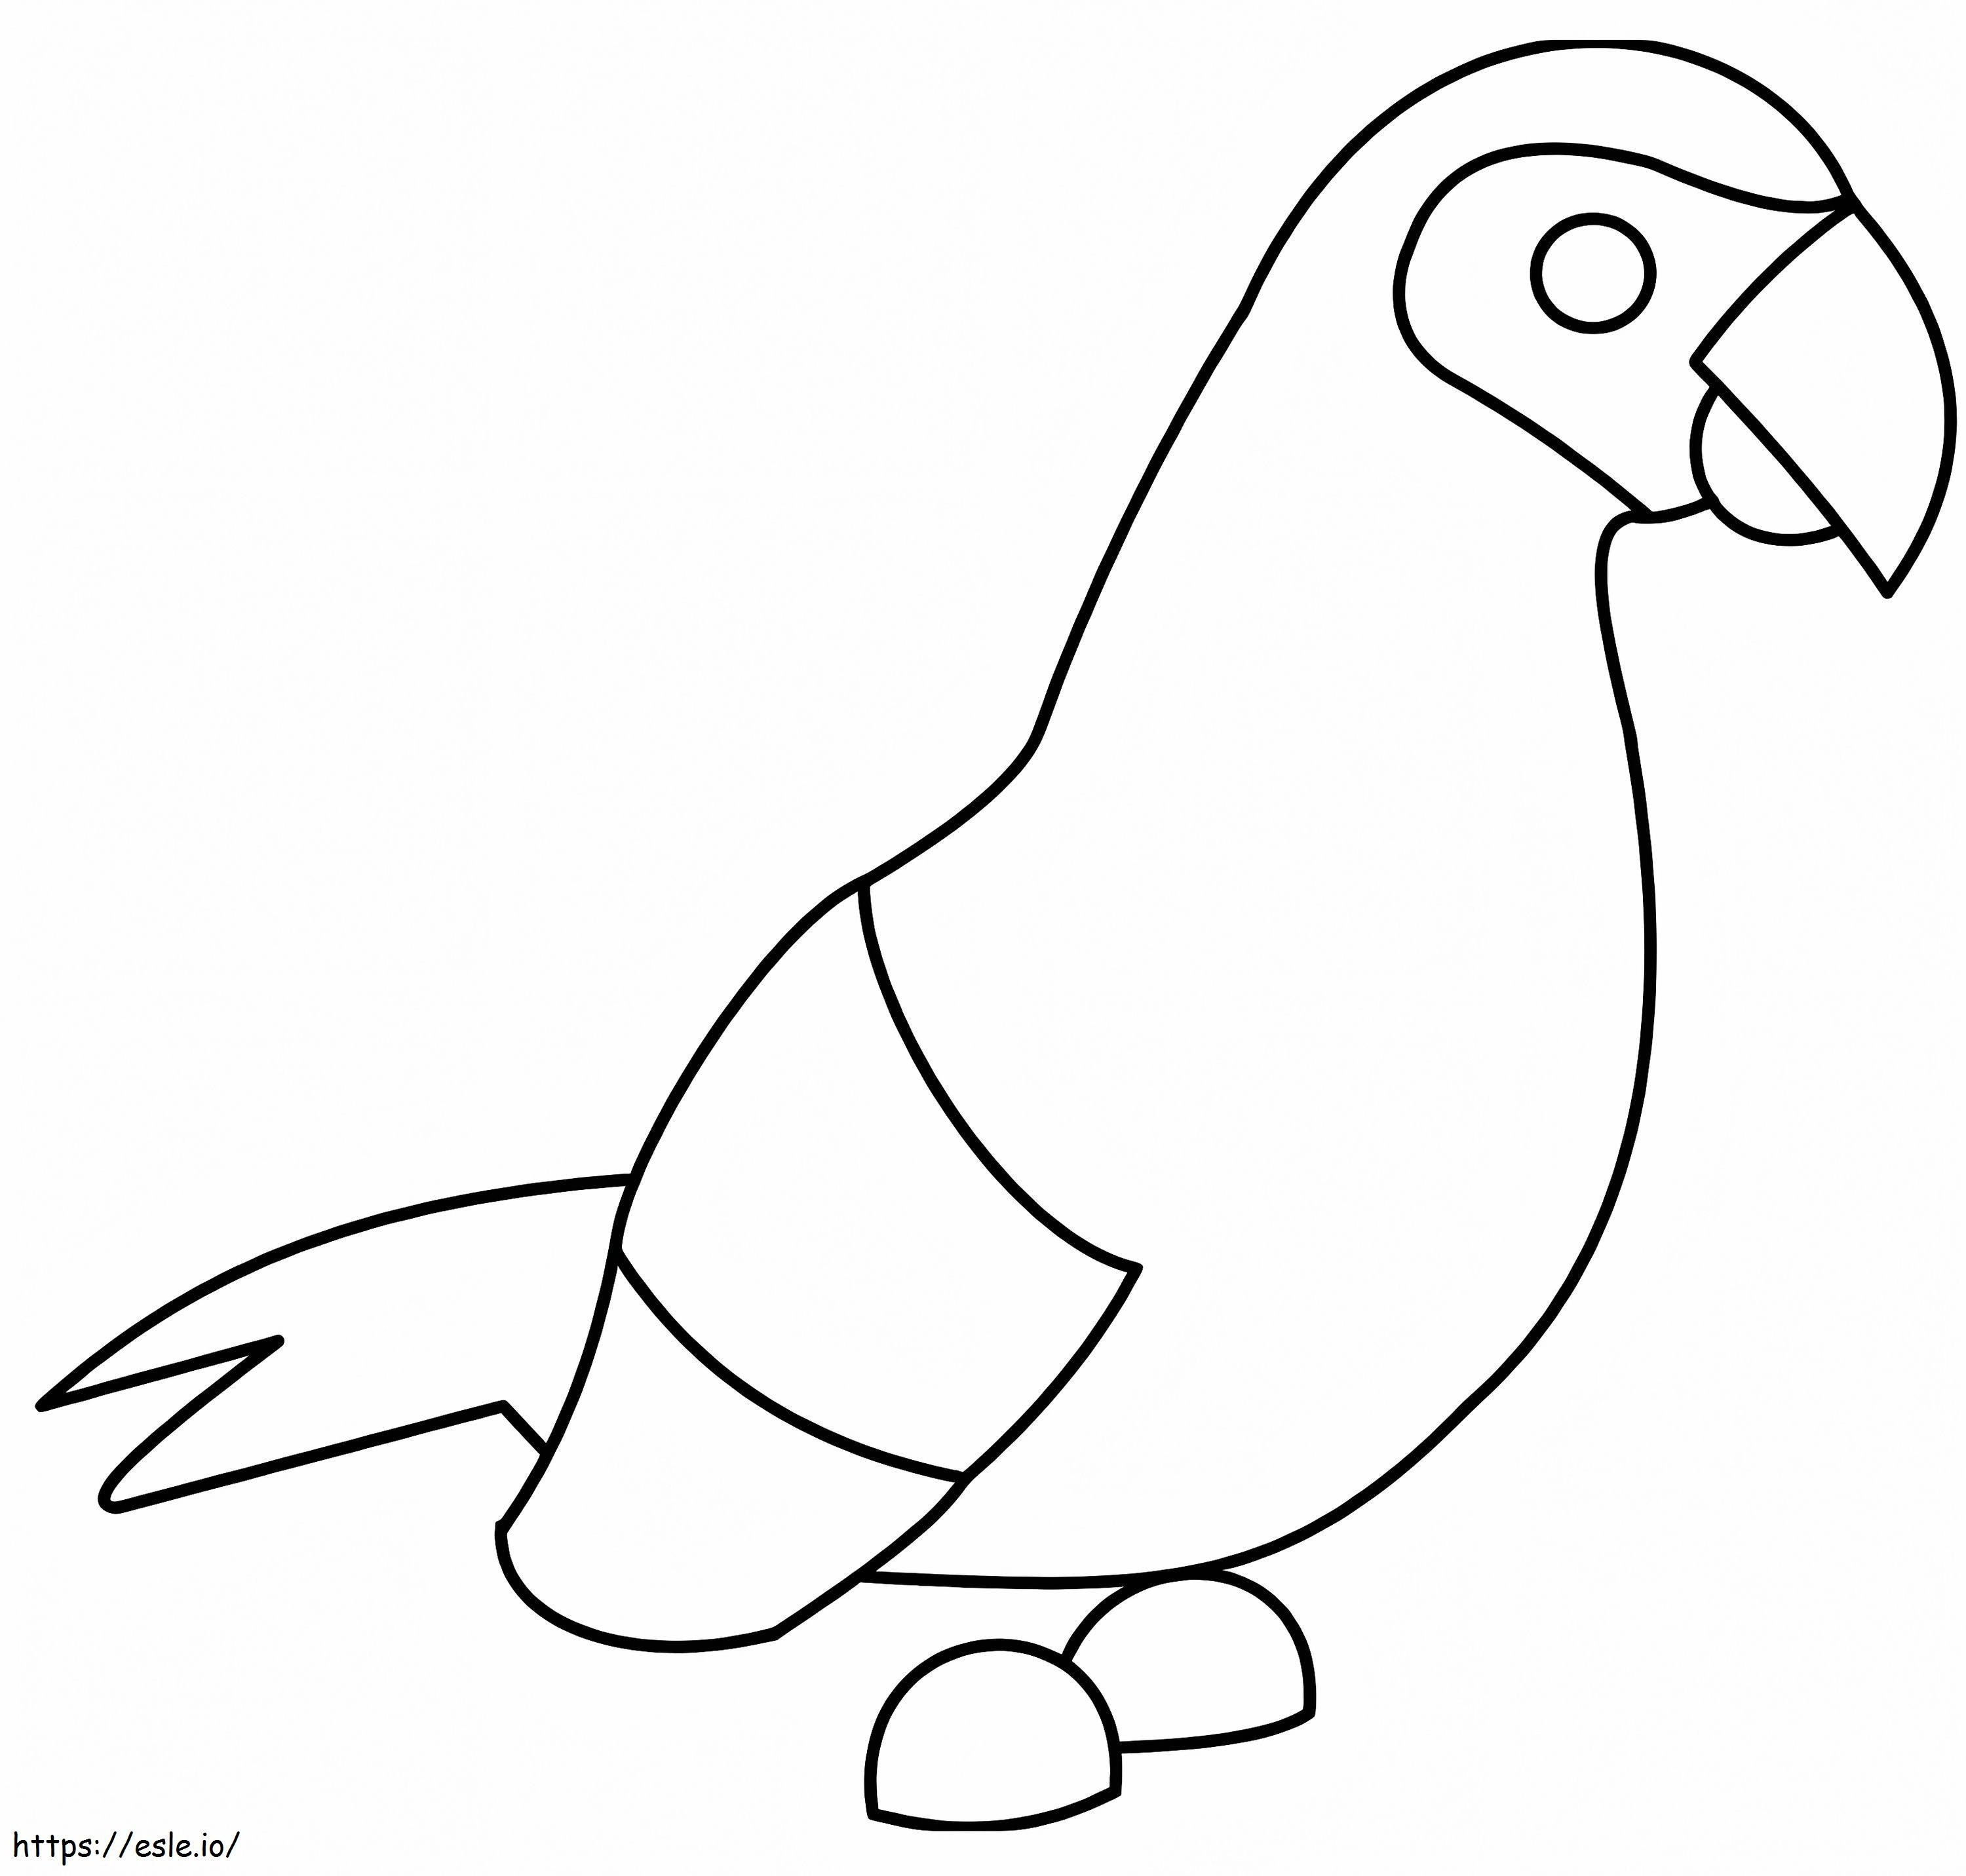 Parrot Adopt Me coloring page